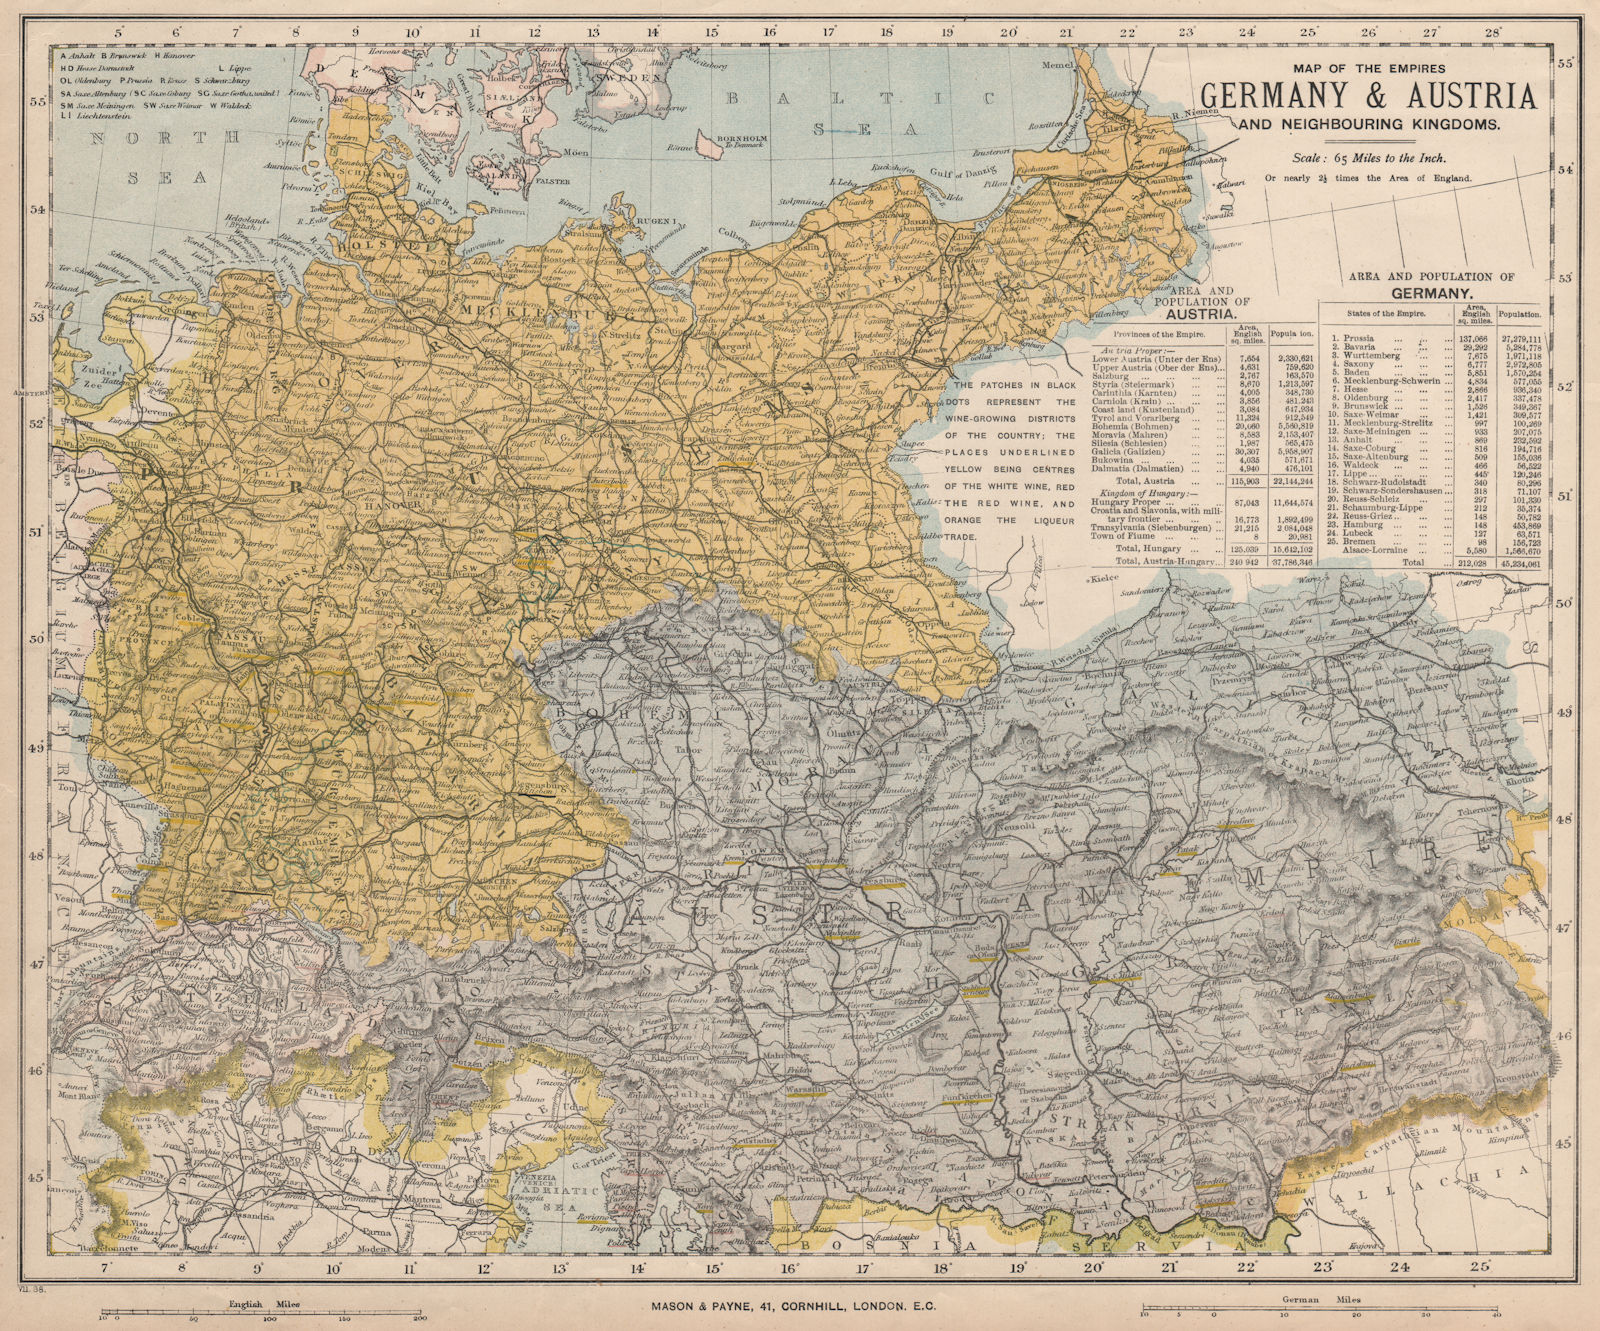 GERMANY & AUSTRIA-HUNGARY. Red & white wine growing regions. LETTS 1889 map